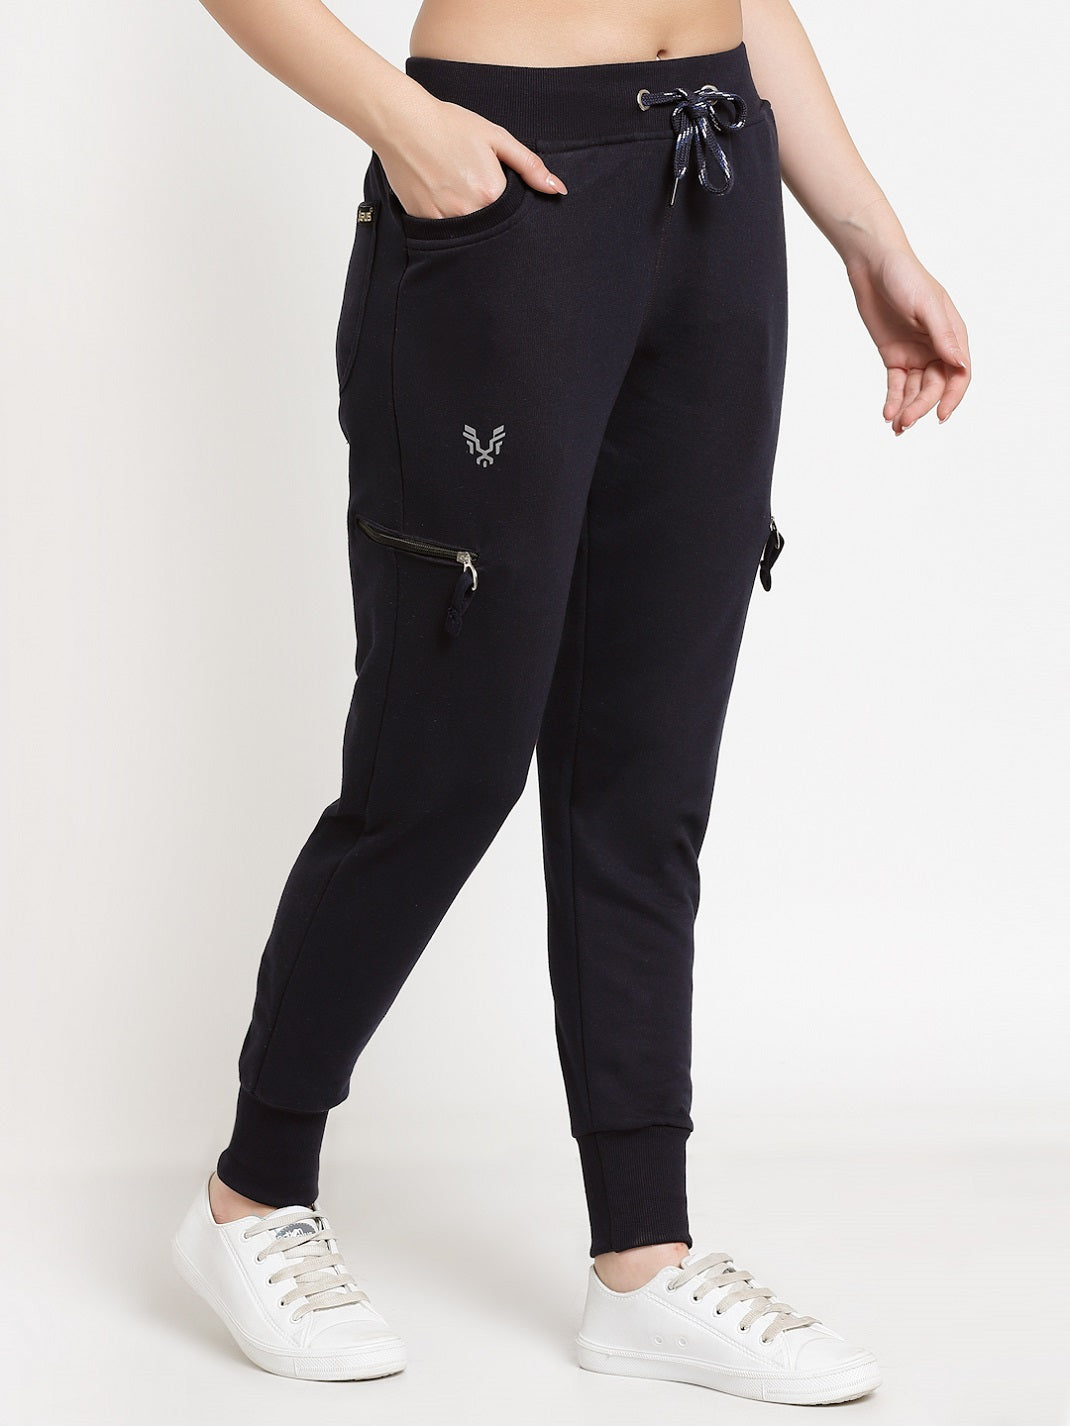 Womens Sweatpants in Womens Workout Bottoms